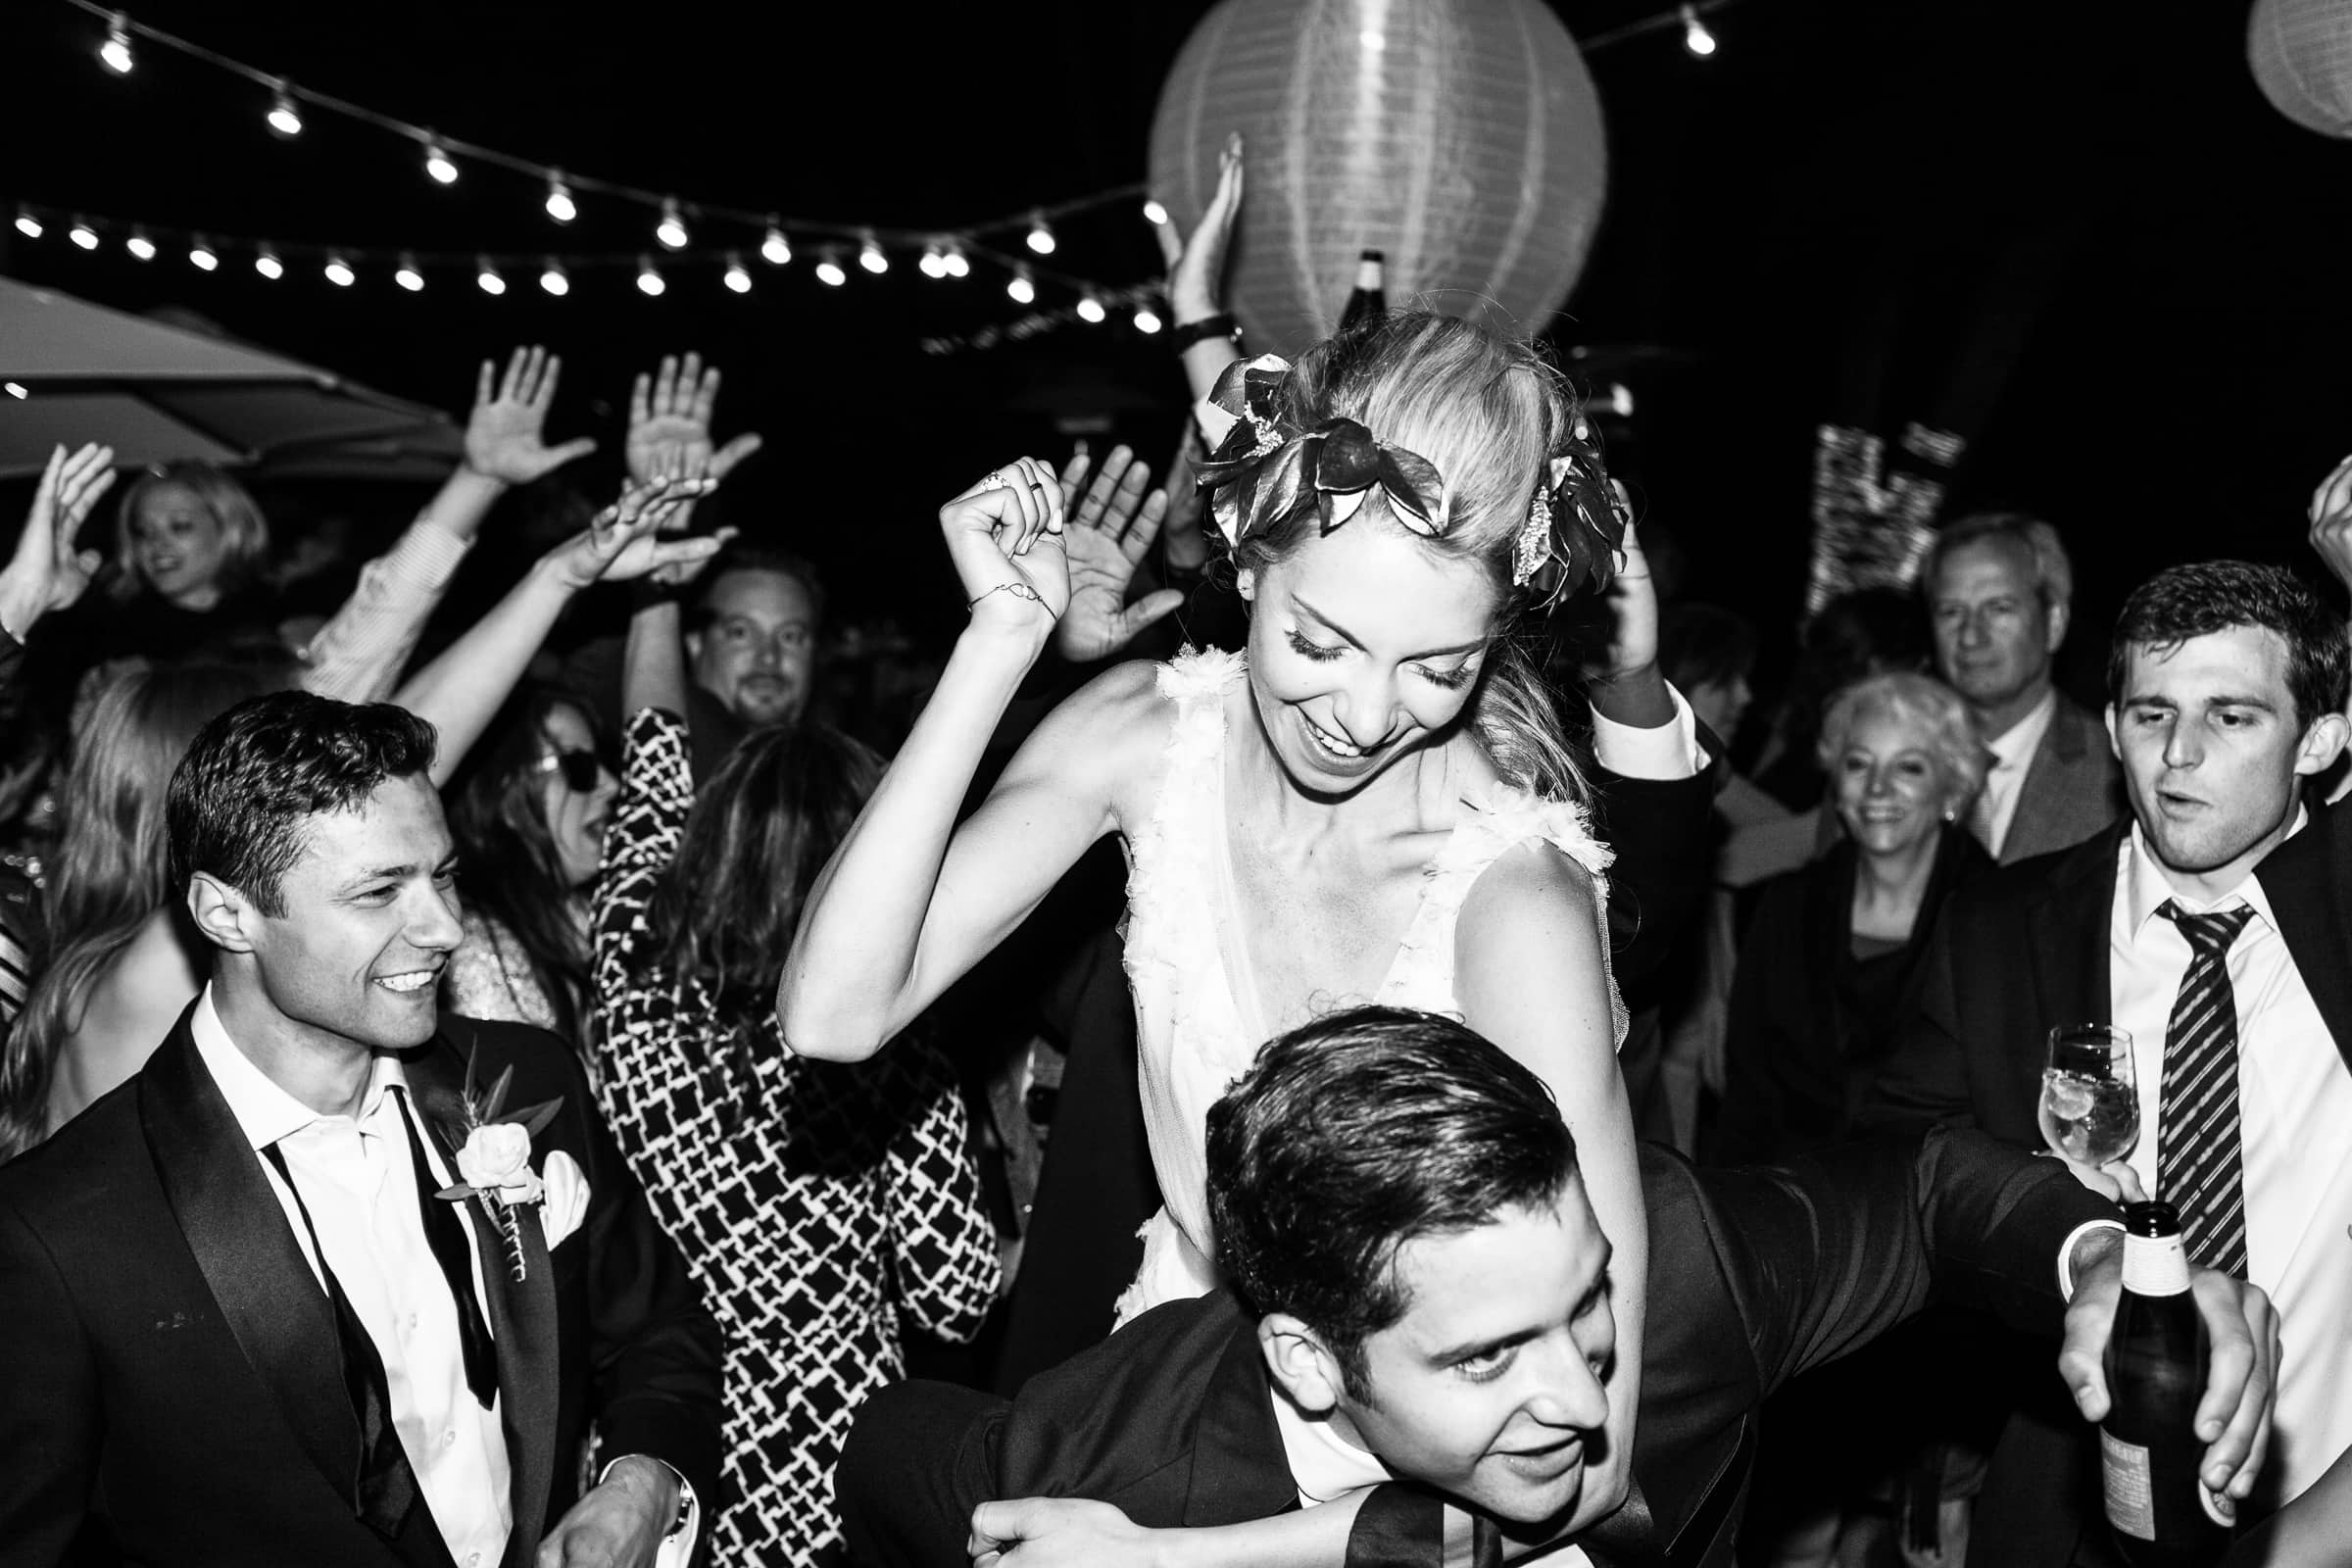 bride being carried on the dance floor